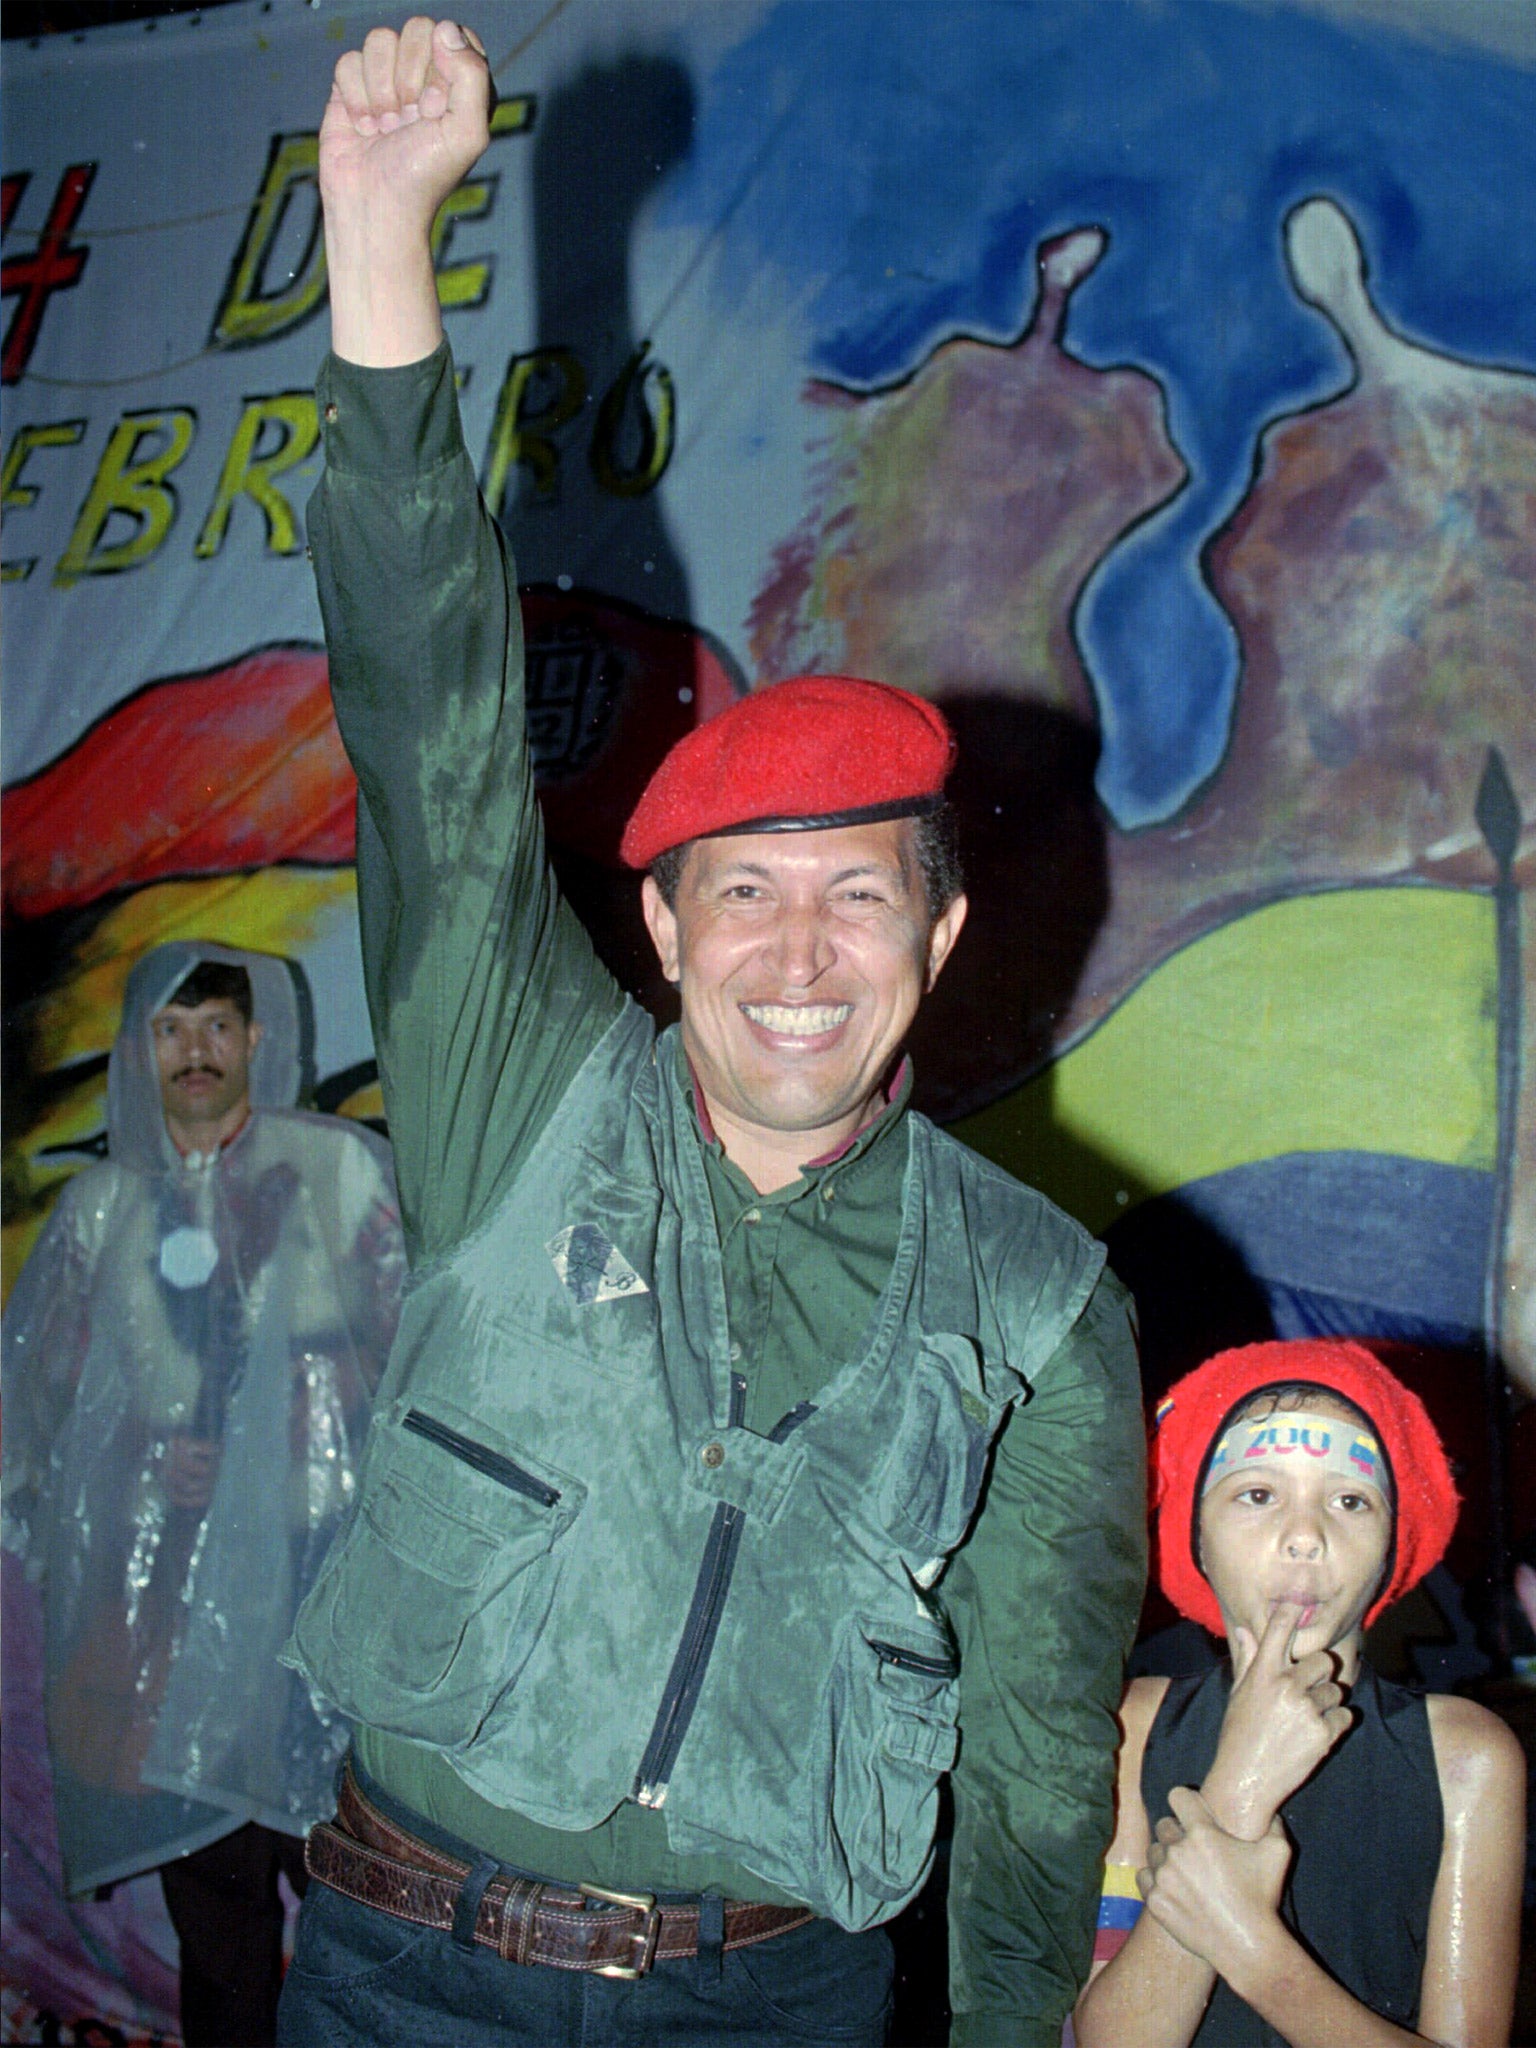 Chavez in 1997, marking the anniversary of his failed coup attempt in 1992